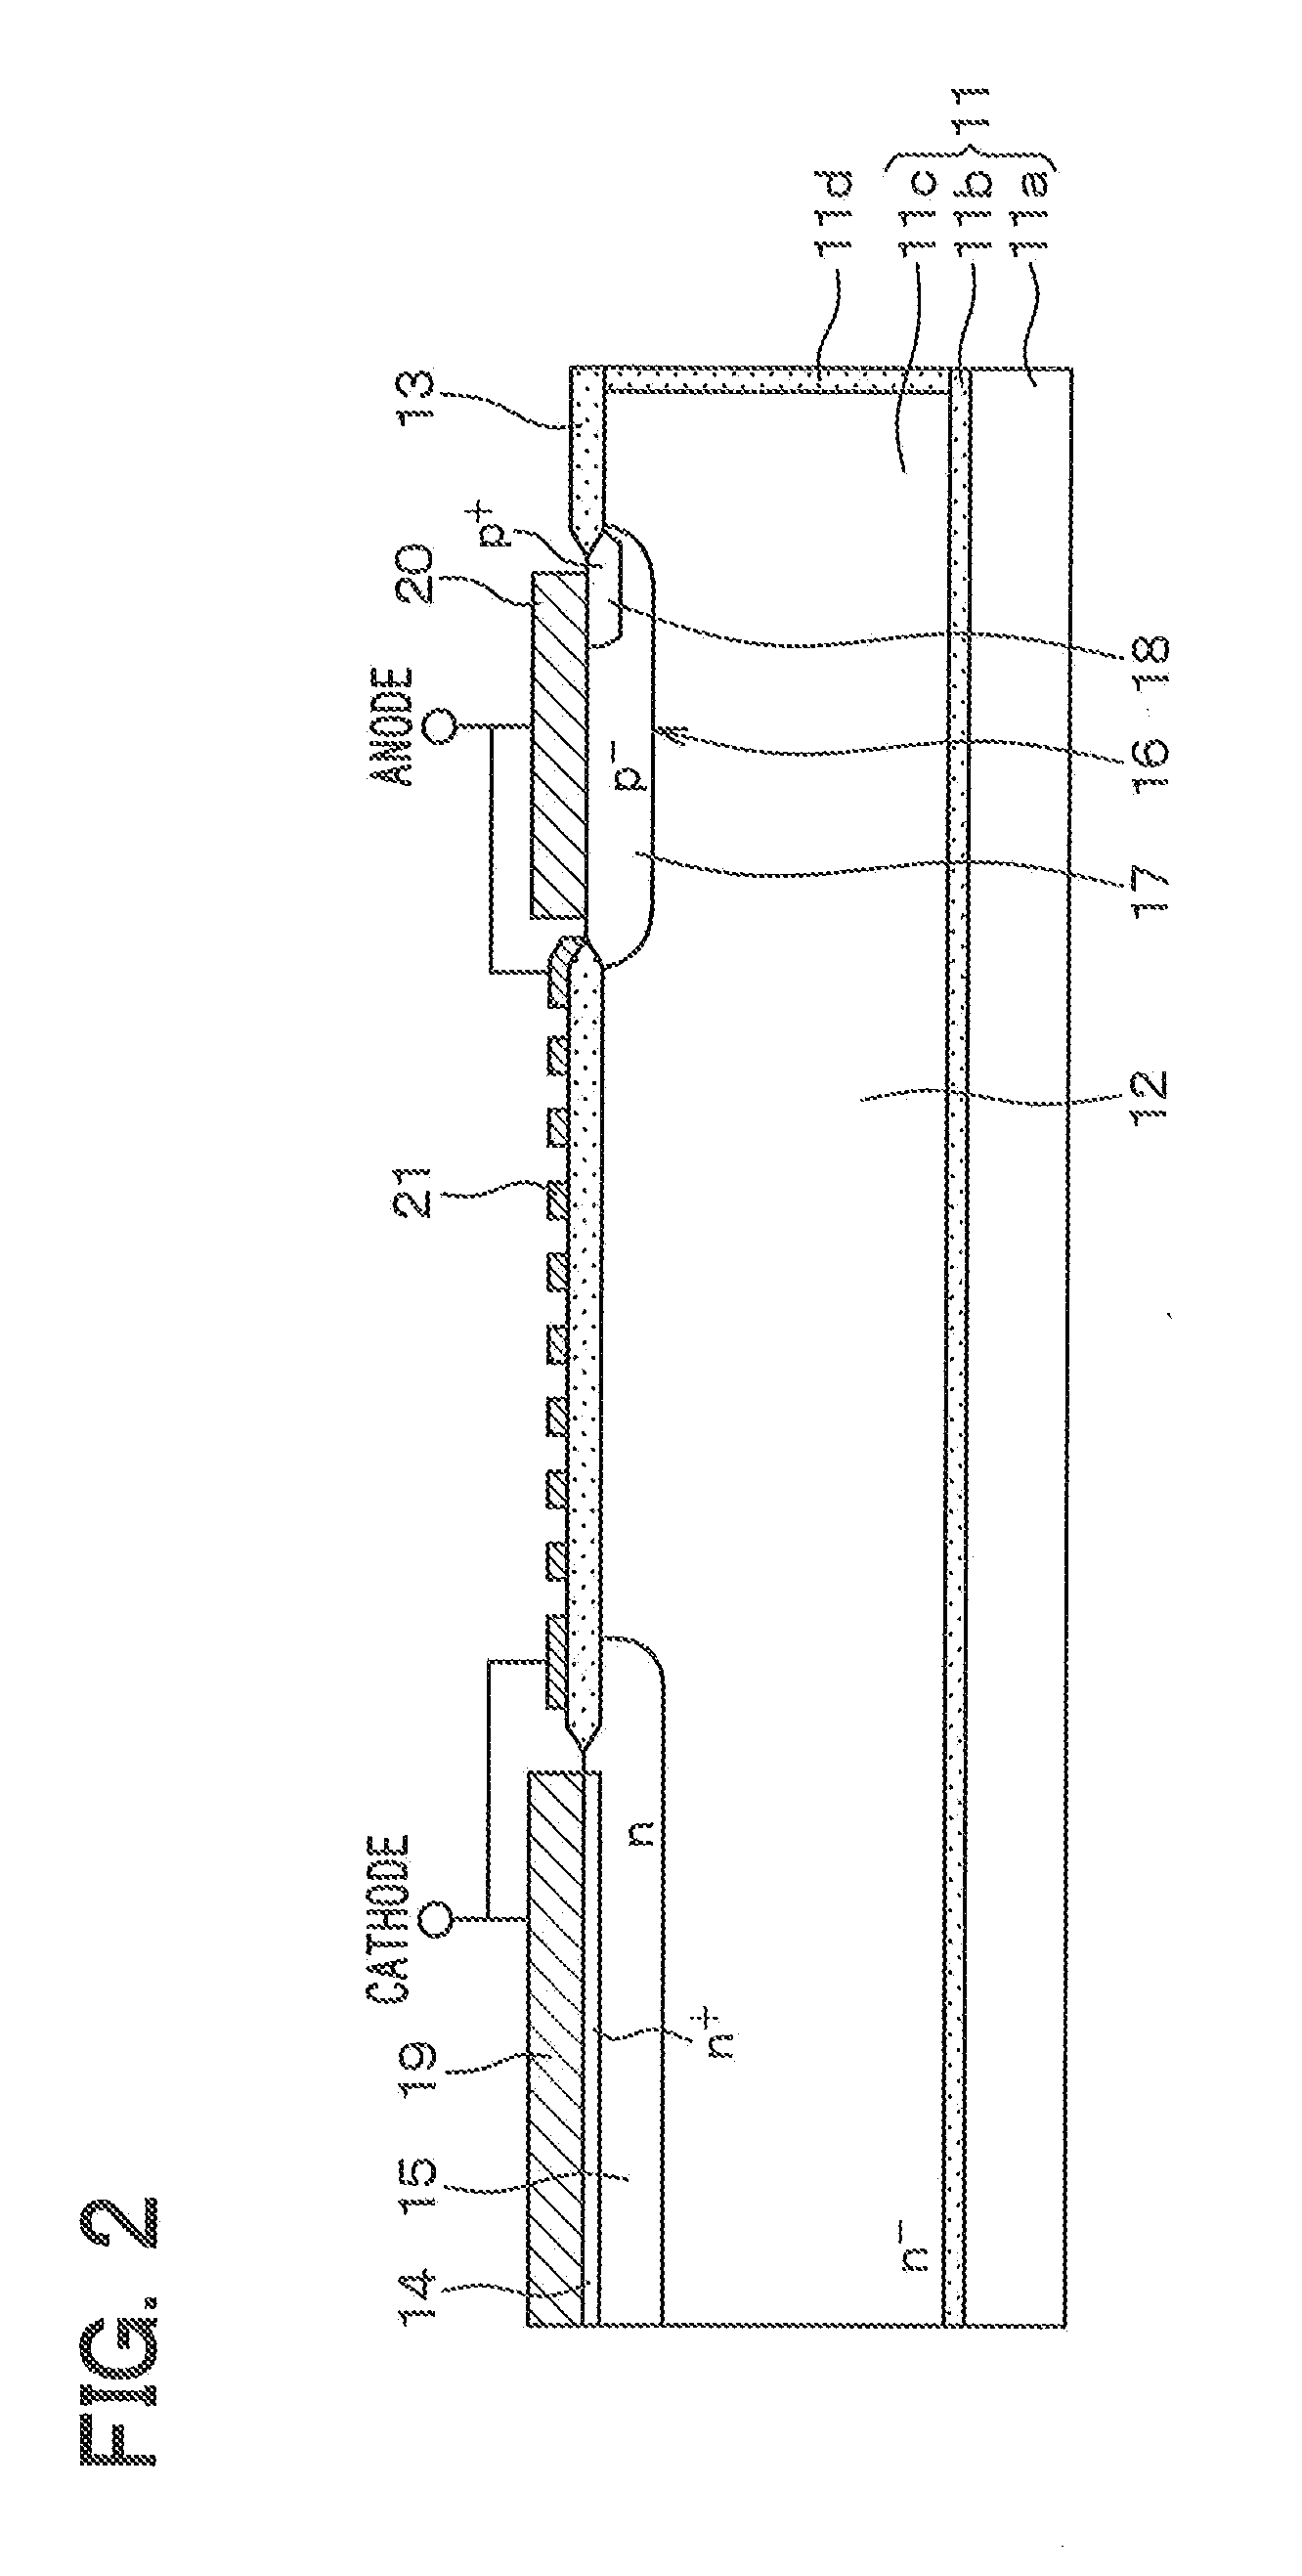 Semiconductor device with lateral element